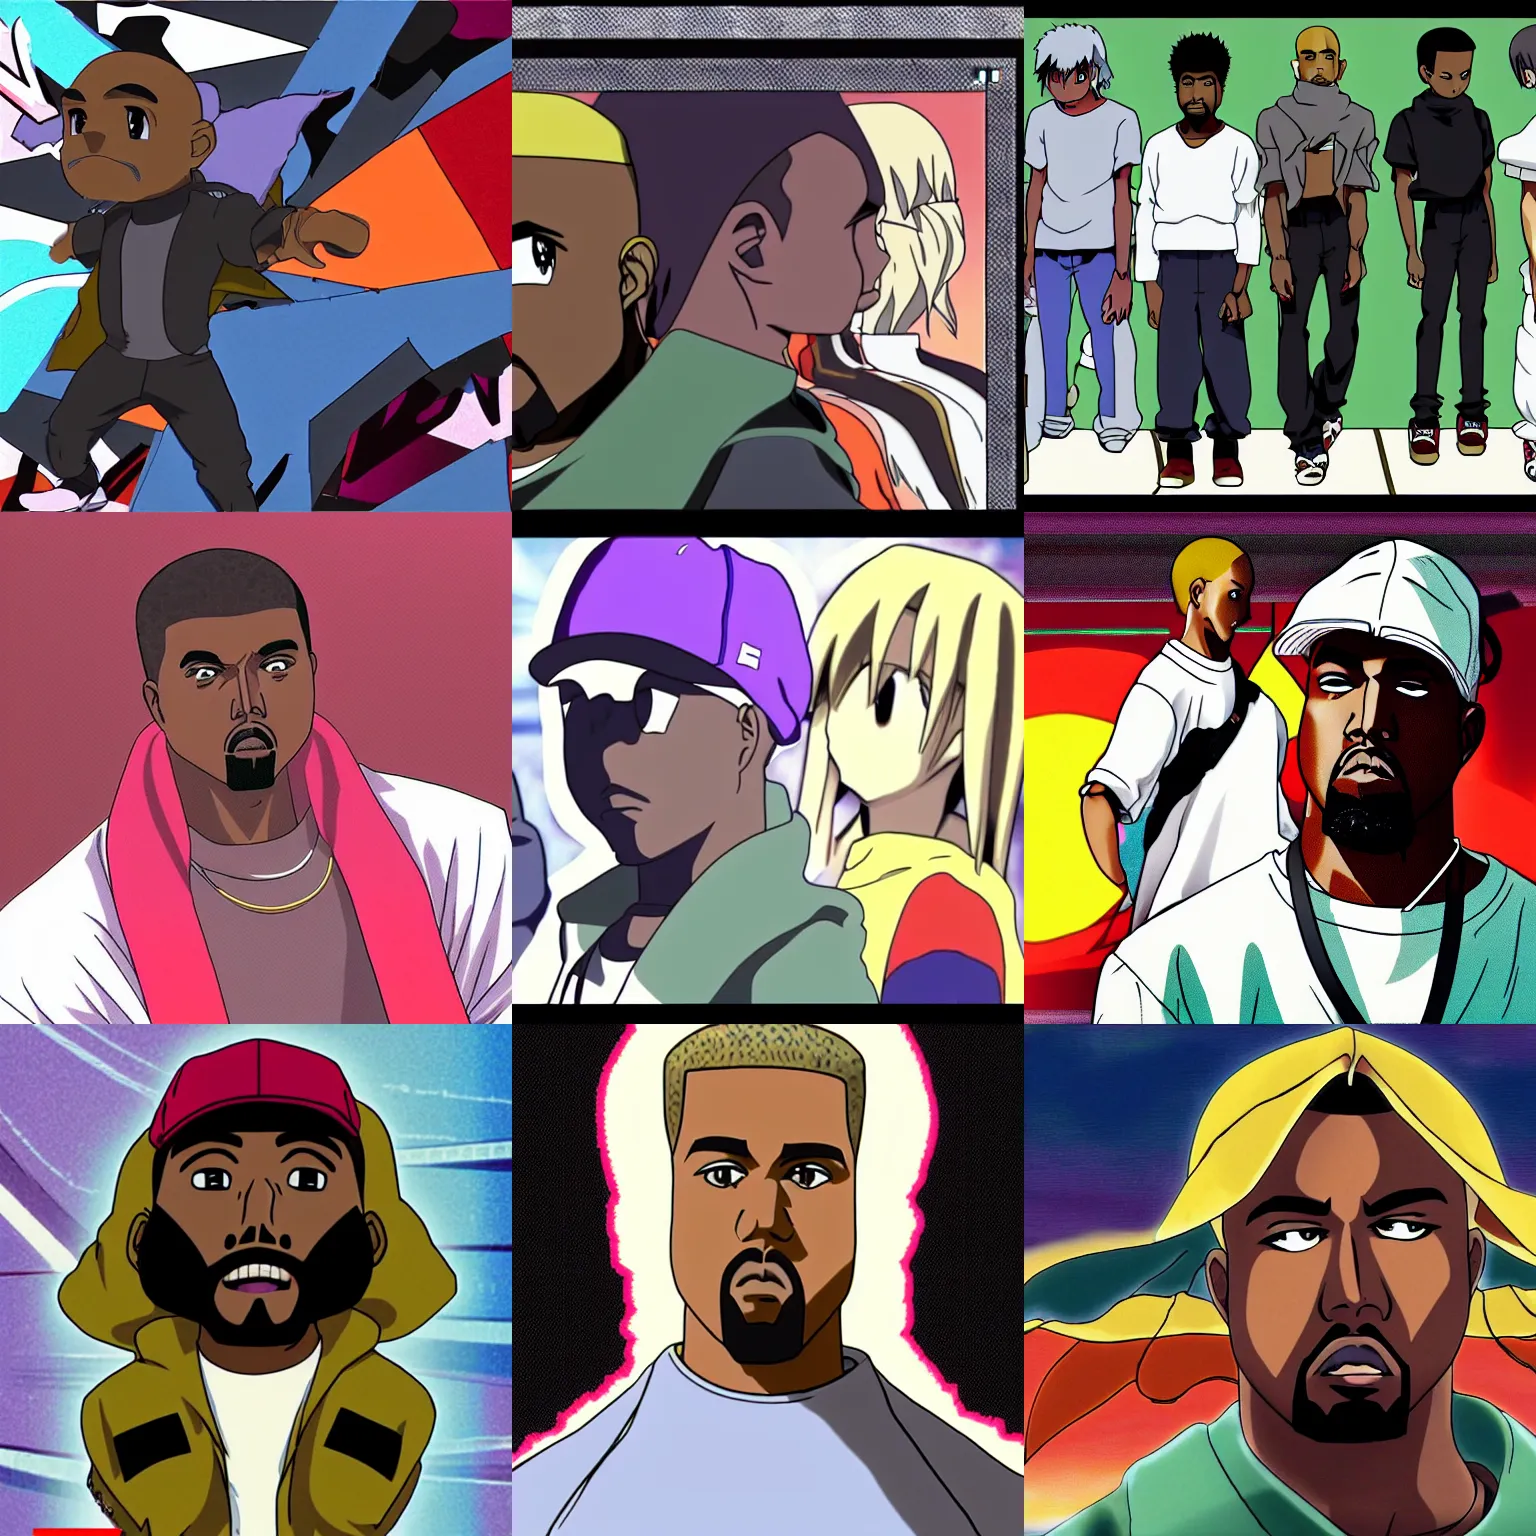 Prompt: Kanye West, screenshot from a 2012s anime, by Ken Sugimori